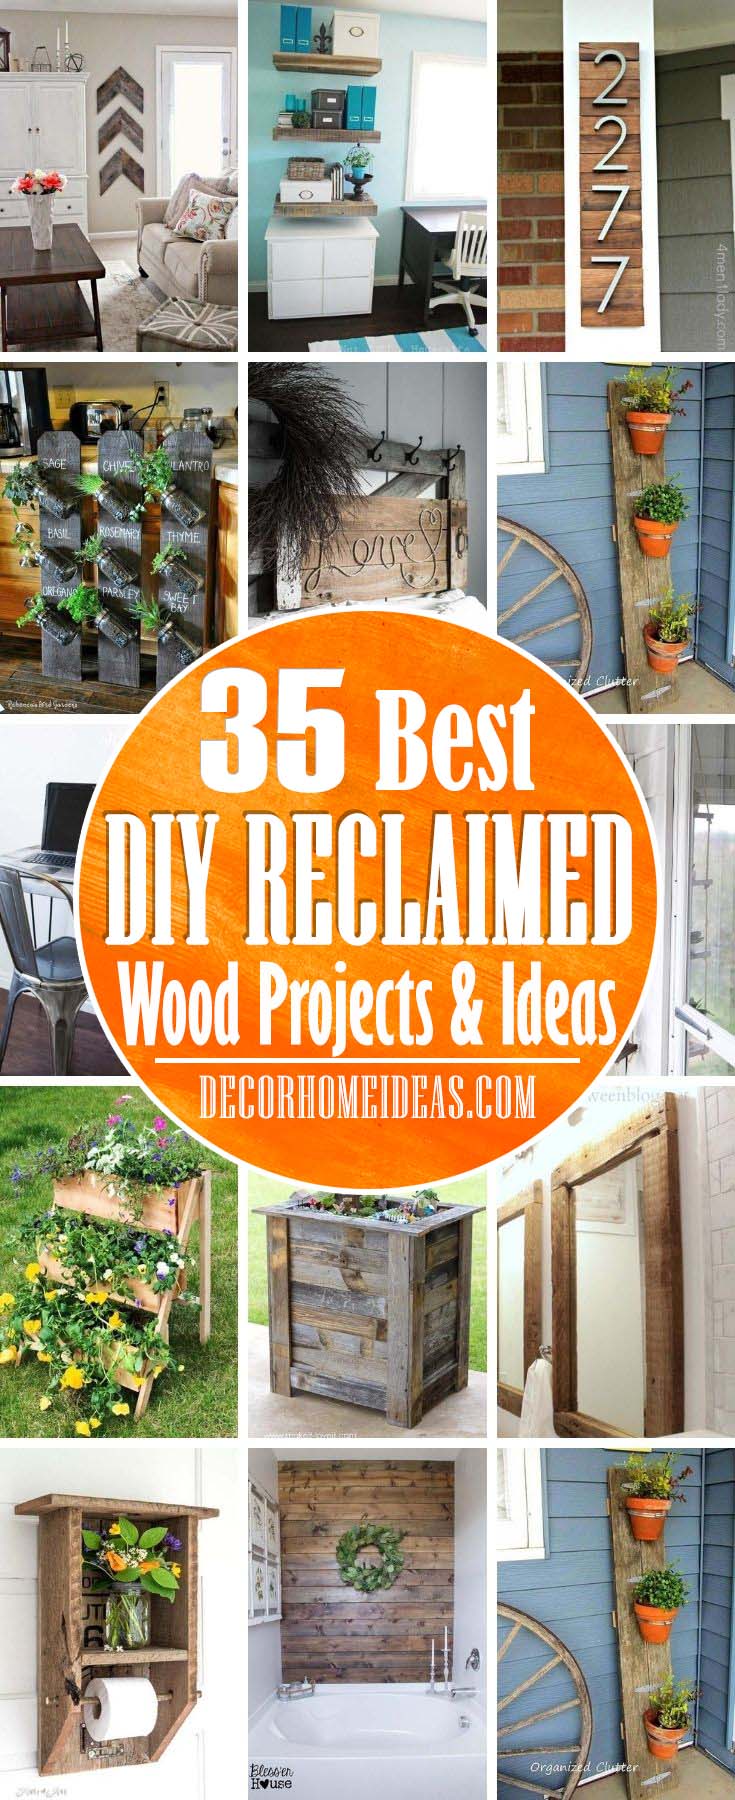 Best DIY Reclaimed Wood Project Ideas. Reclaimed wood projects are inexpensive and relatively easy to do. Moreover, no professional skill is required to create something beautiful. #decorhomeideas